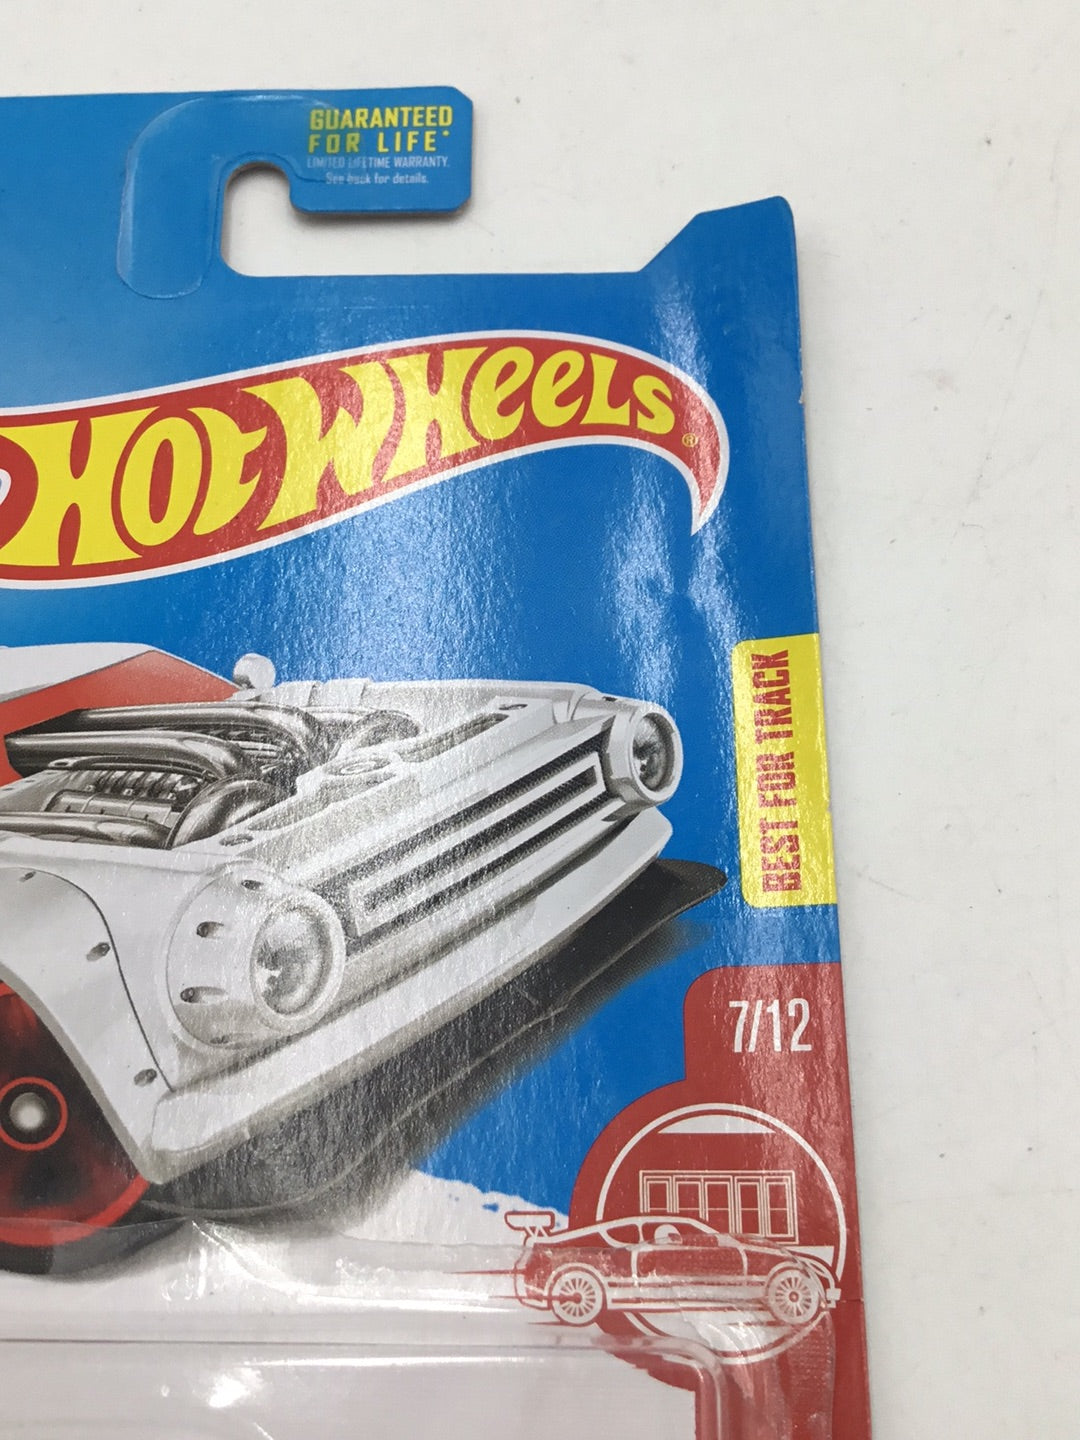 2018 hot wheels red edition #7 Night Shifter target red (Bad Card) Y7